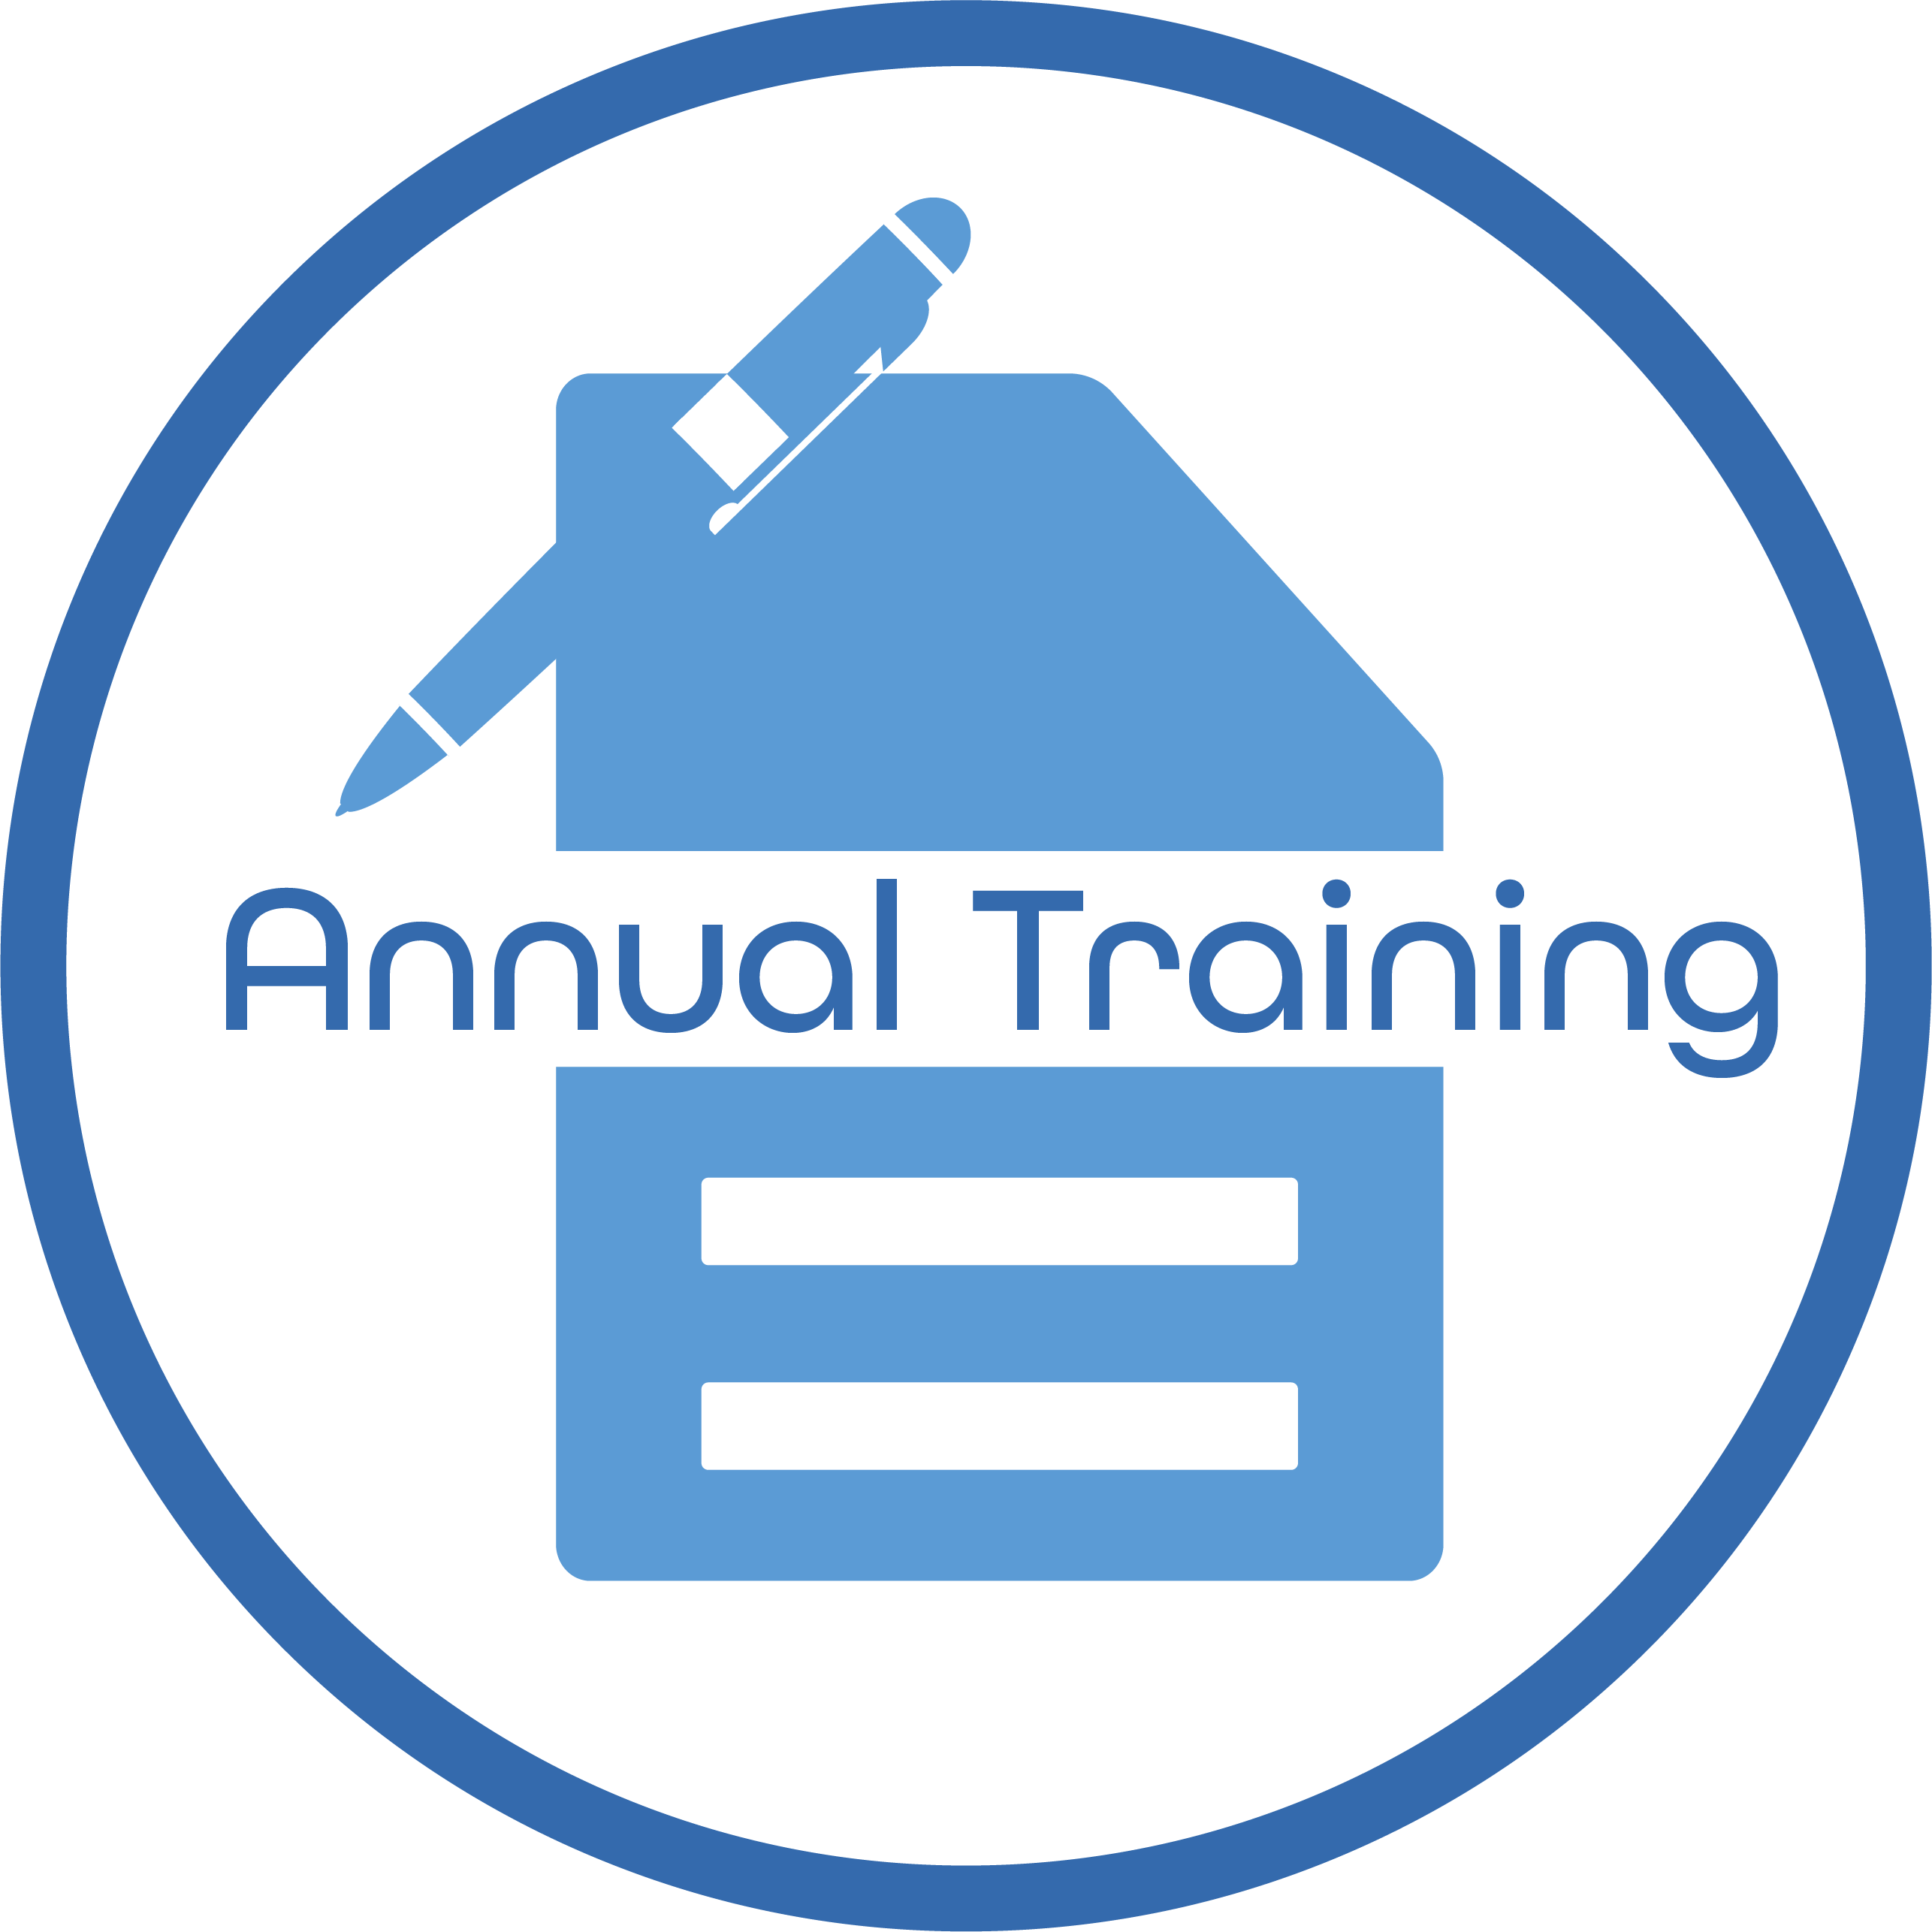 link to Annual Training page